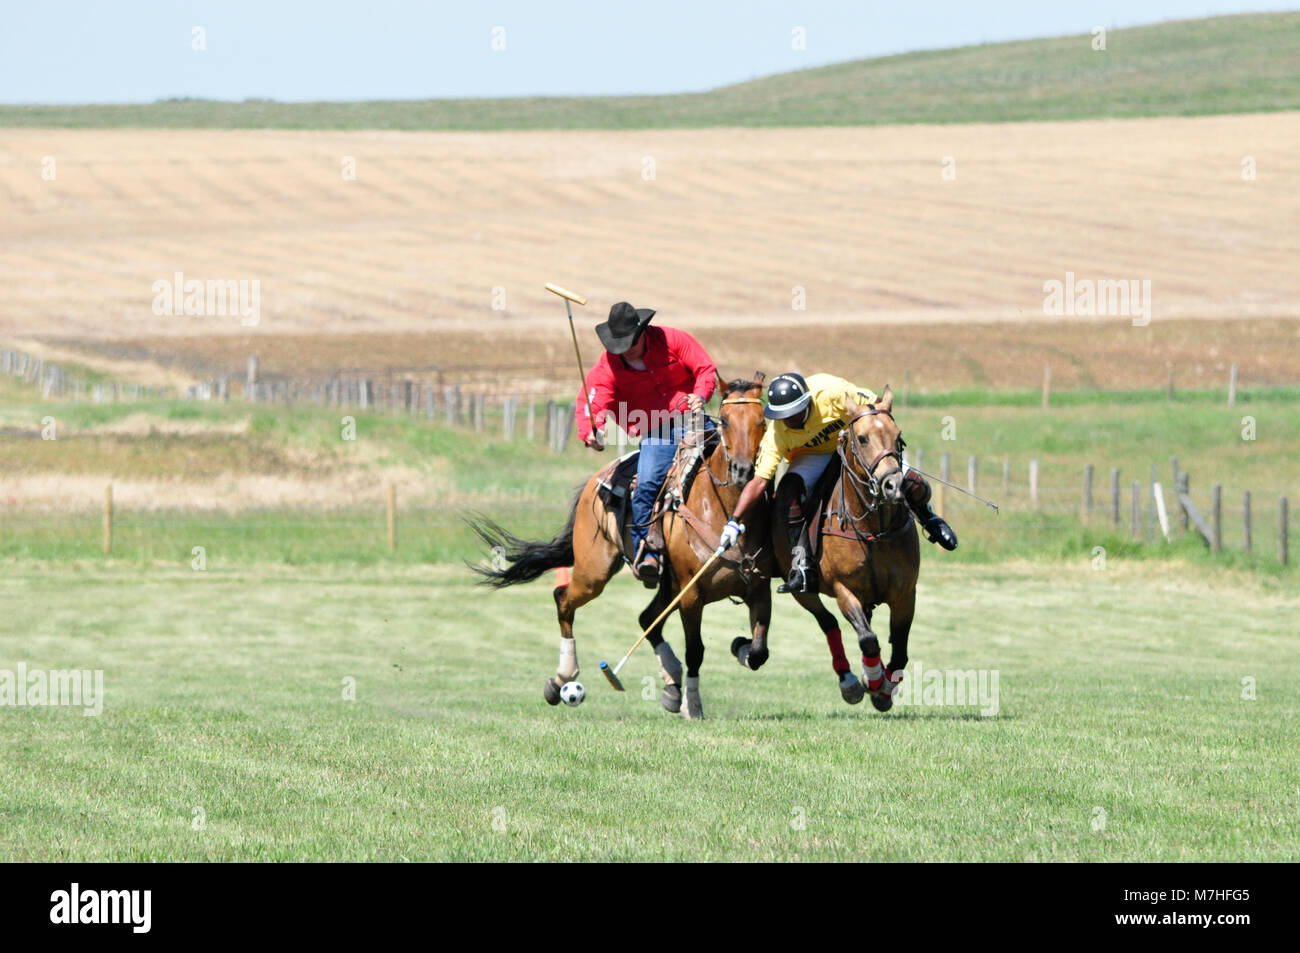 A polo player strikes a ball with a cowboy in hot pursuit during a cowboys versus polo players game at the Historic Bar U Ranch in Longview, Alberta,  Stock Photo